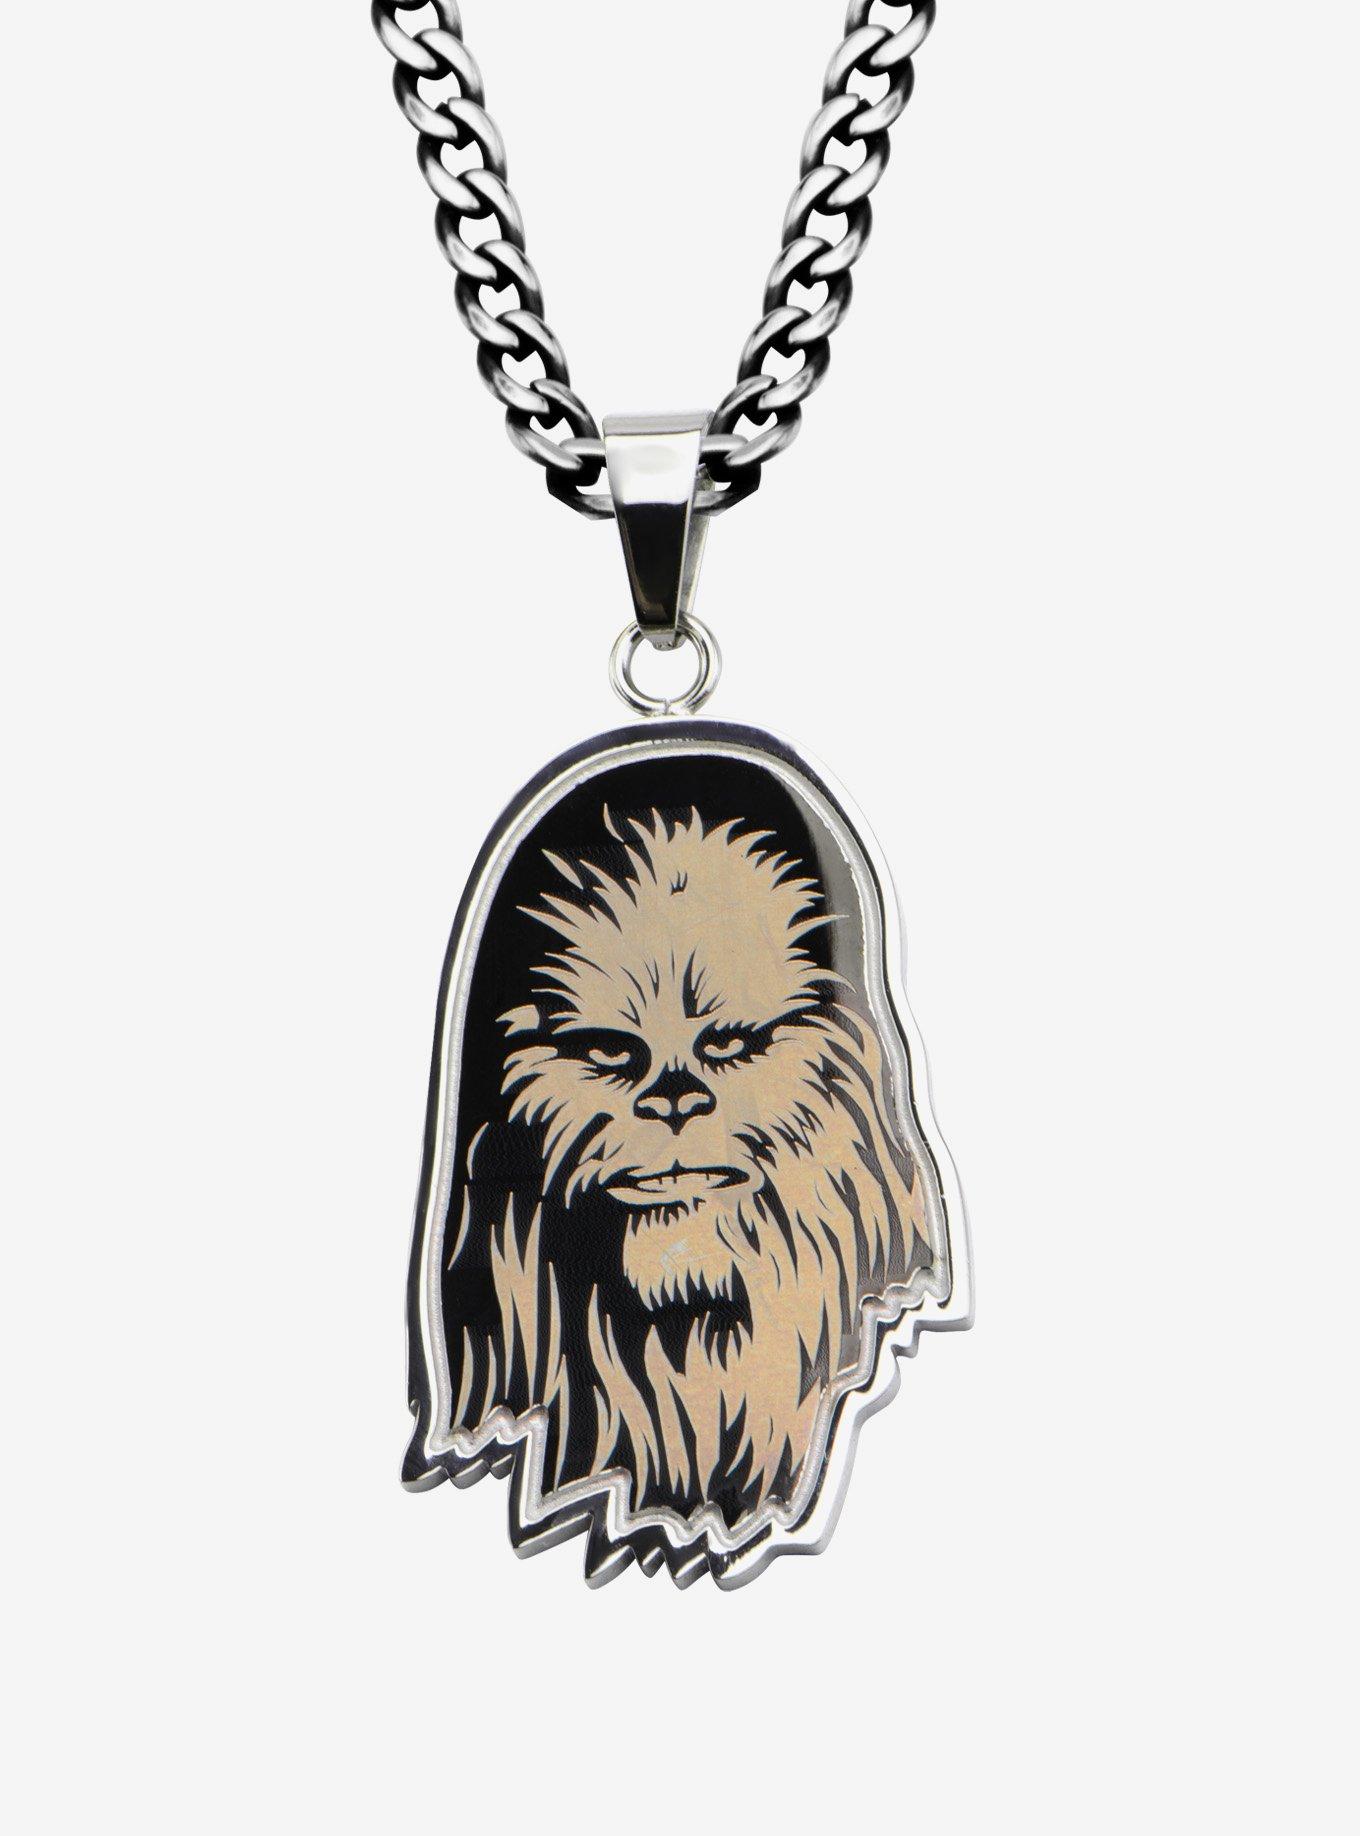 Star Wars Etched Chewbacca Pendant Necklace, , hi-res